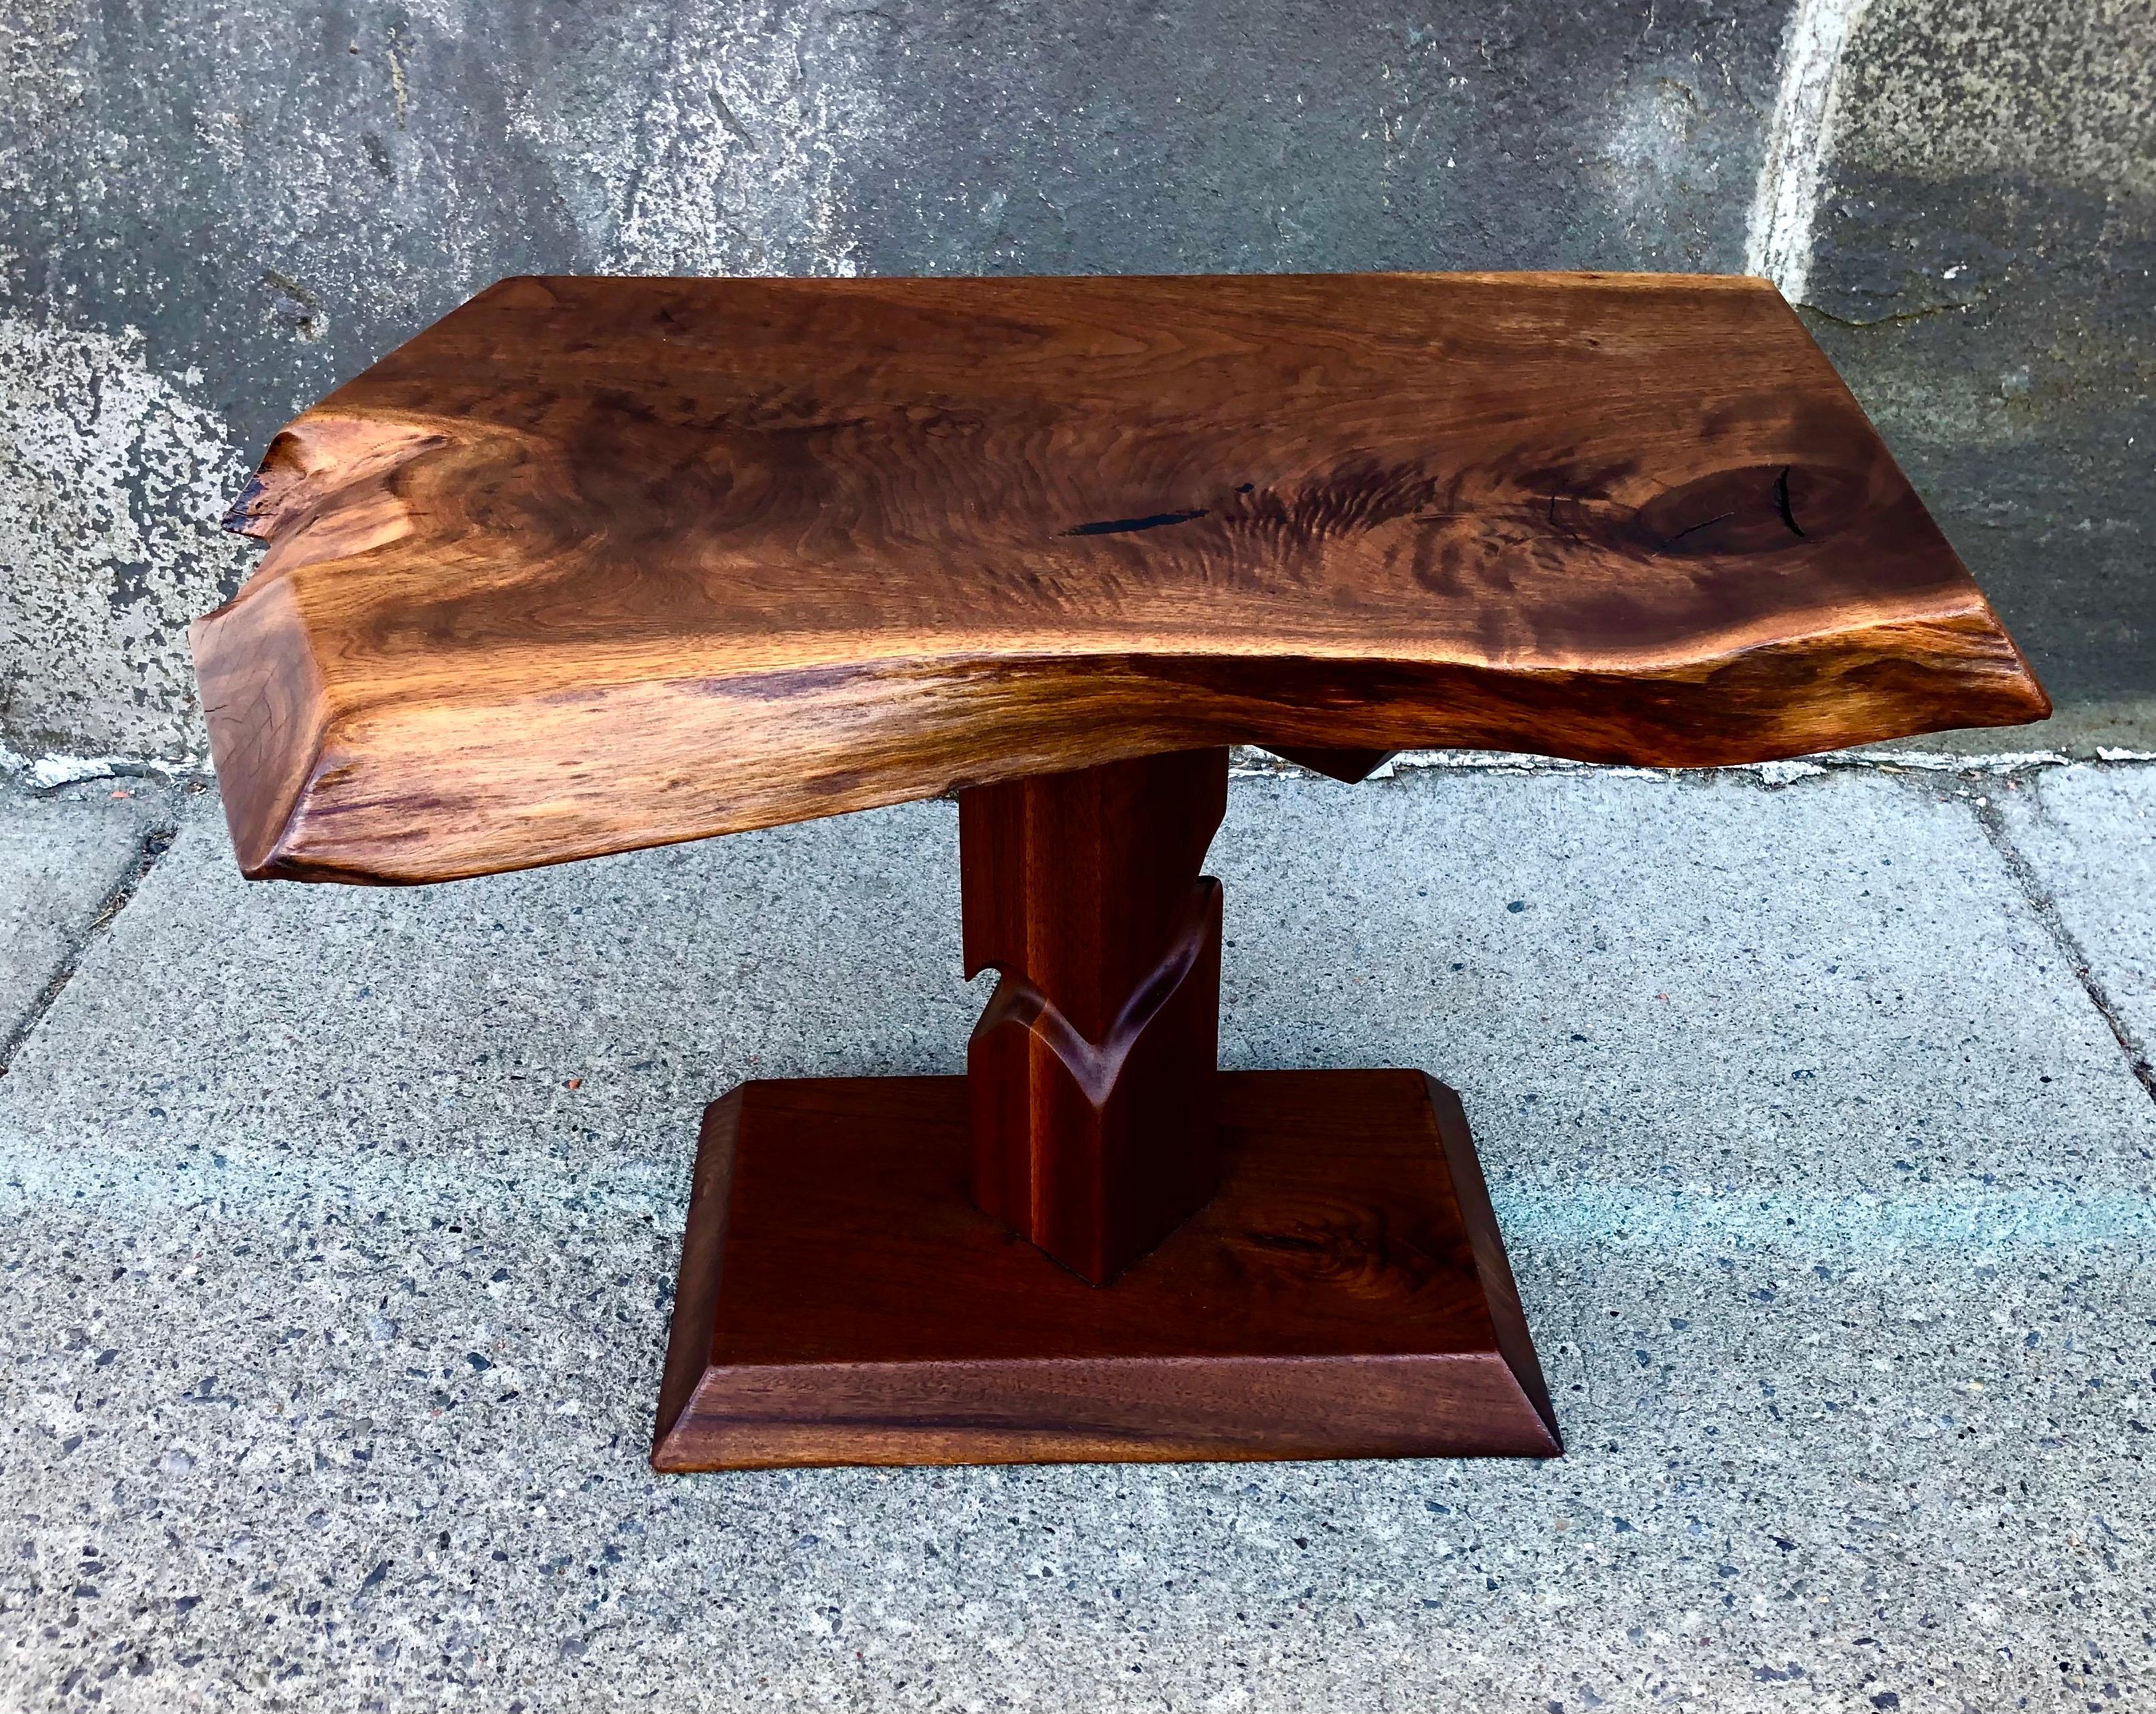 Solid old growth black walnut, the free-edge top raised on notch-carved pedestal base, with a hand-rubbed linseed oil finish. Alan Rockwell was part of the Nakashima workshop in the 1960s and 1970s while developing his own unique style in his